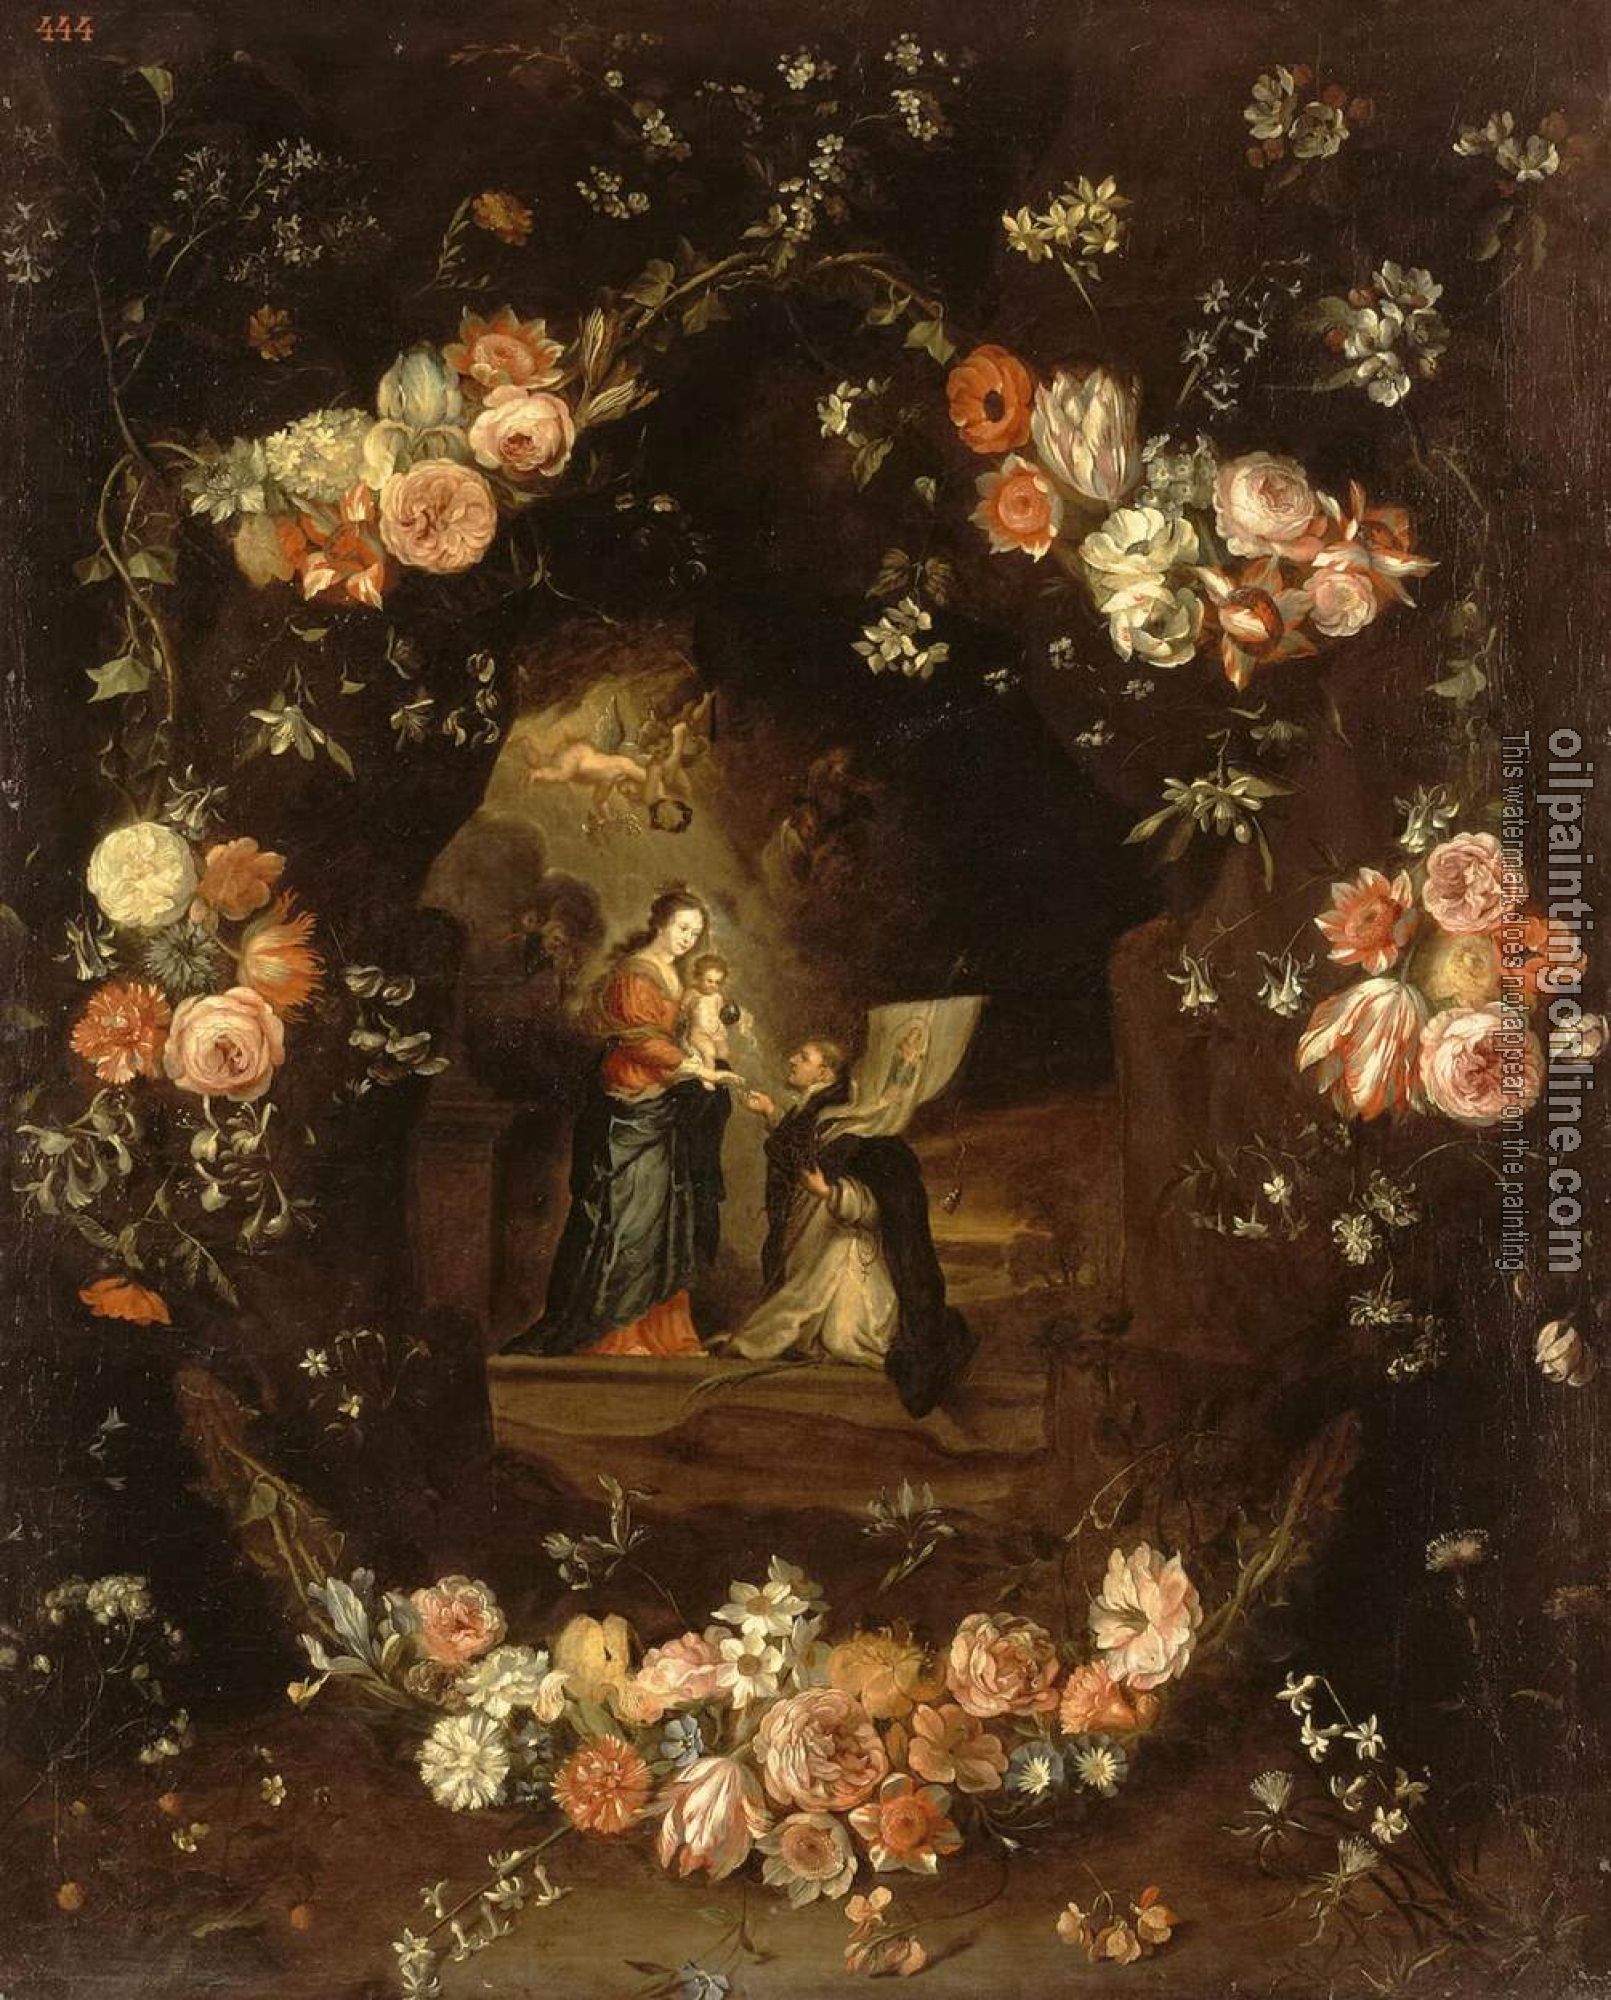 Kessel, Jan van - Madonna with the Child and St Ildephonsus Framed with a Garland of Flowers